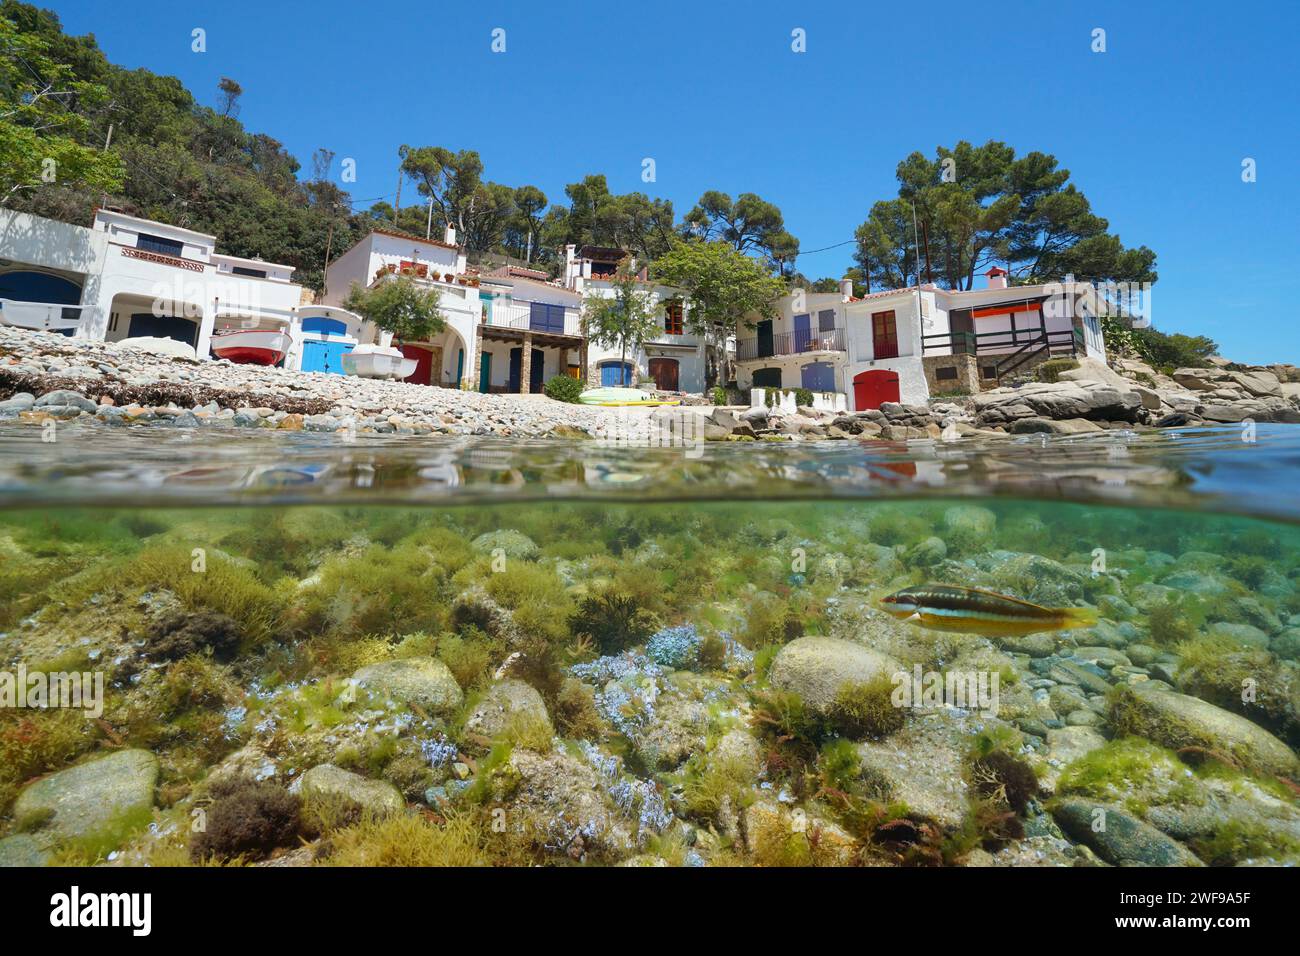 Spain, Mediterranean fishermen’s houses on the sea shore of a rocky beach, split view half over and under water surface, natural scene, Costa Brava Stock Photo